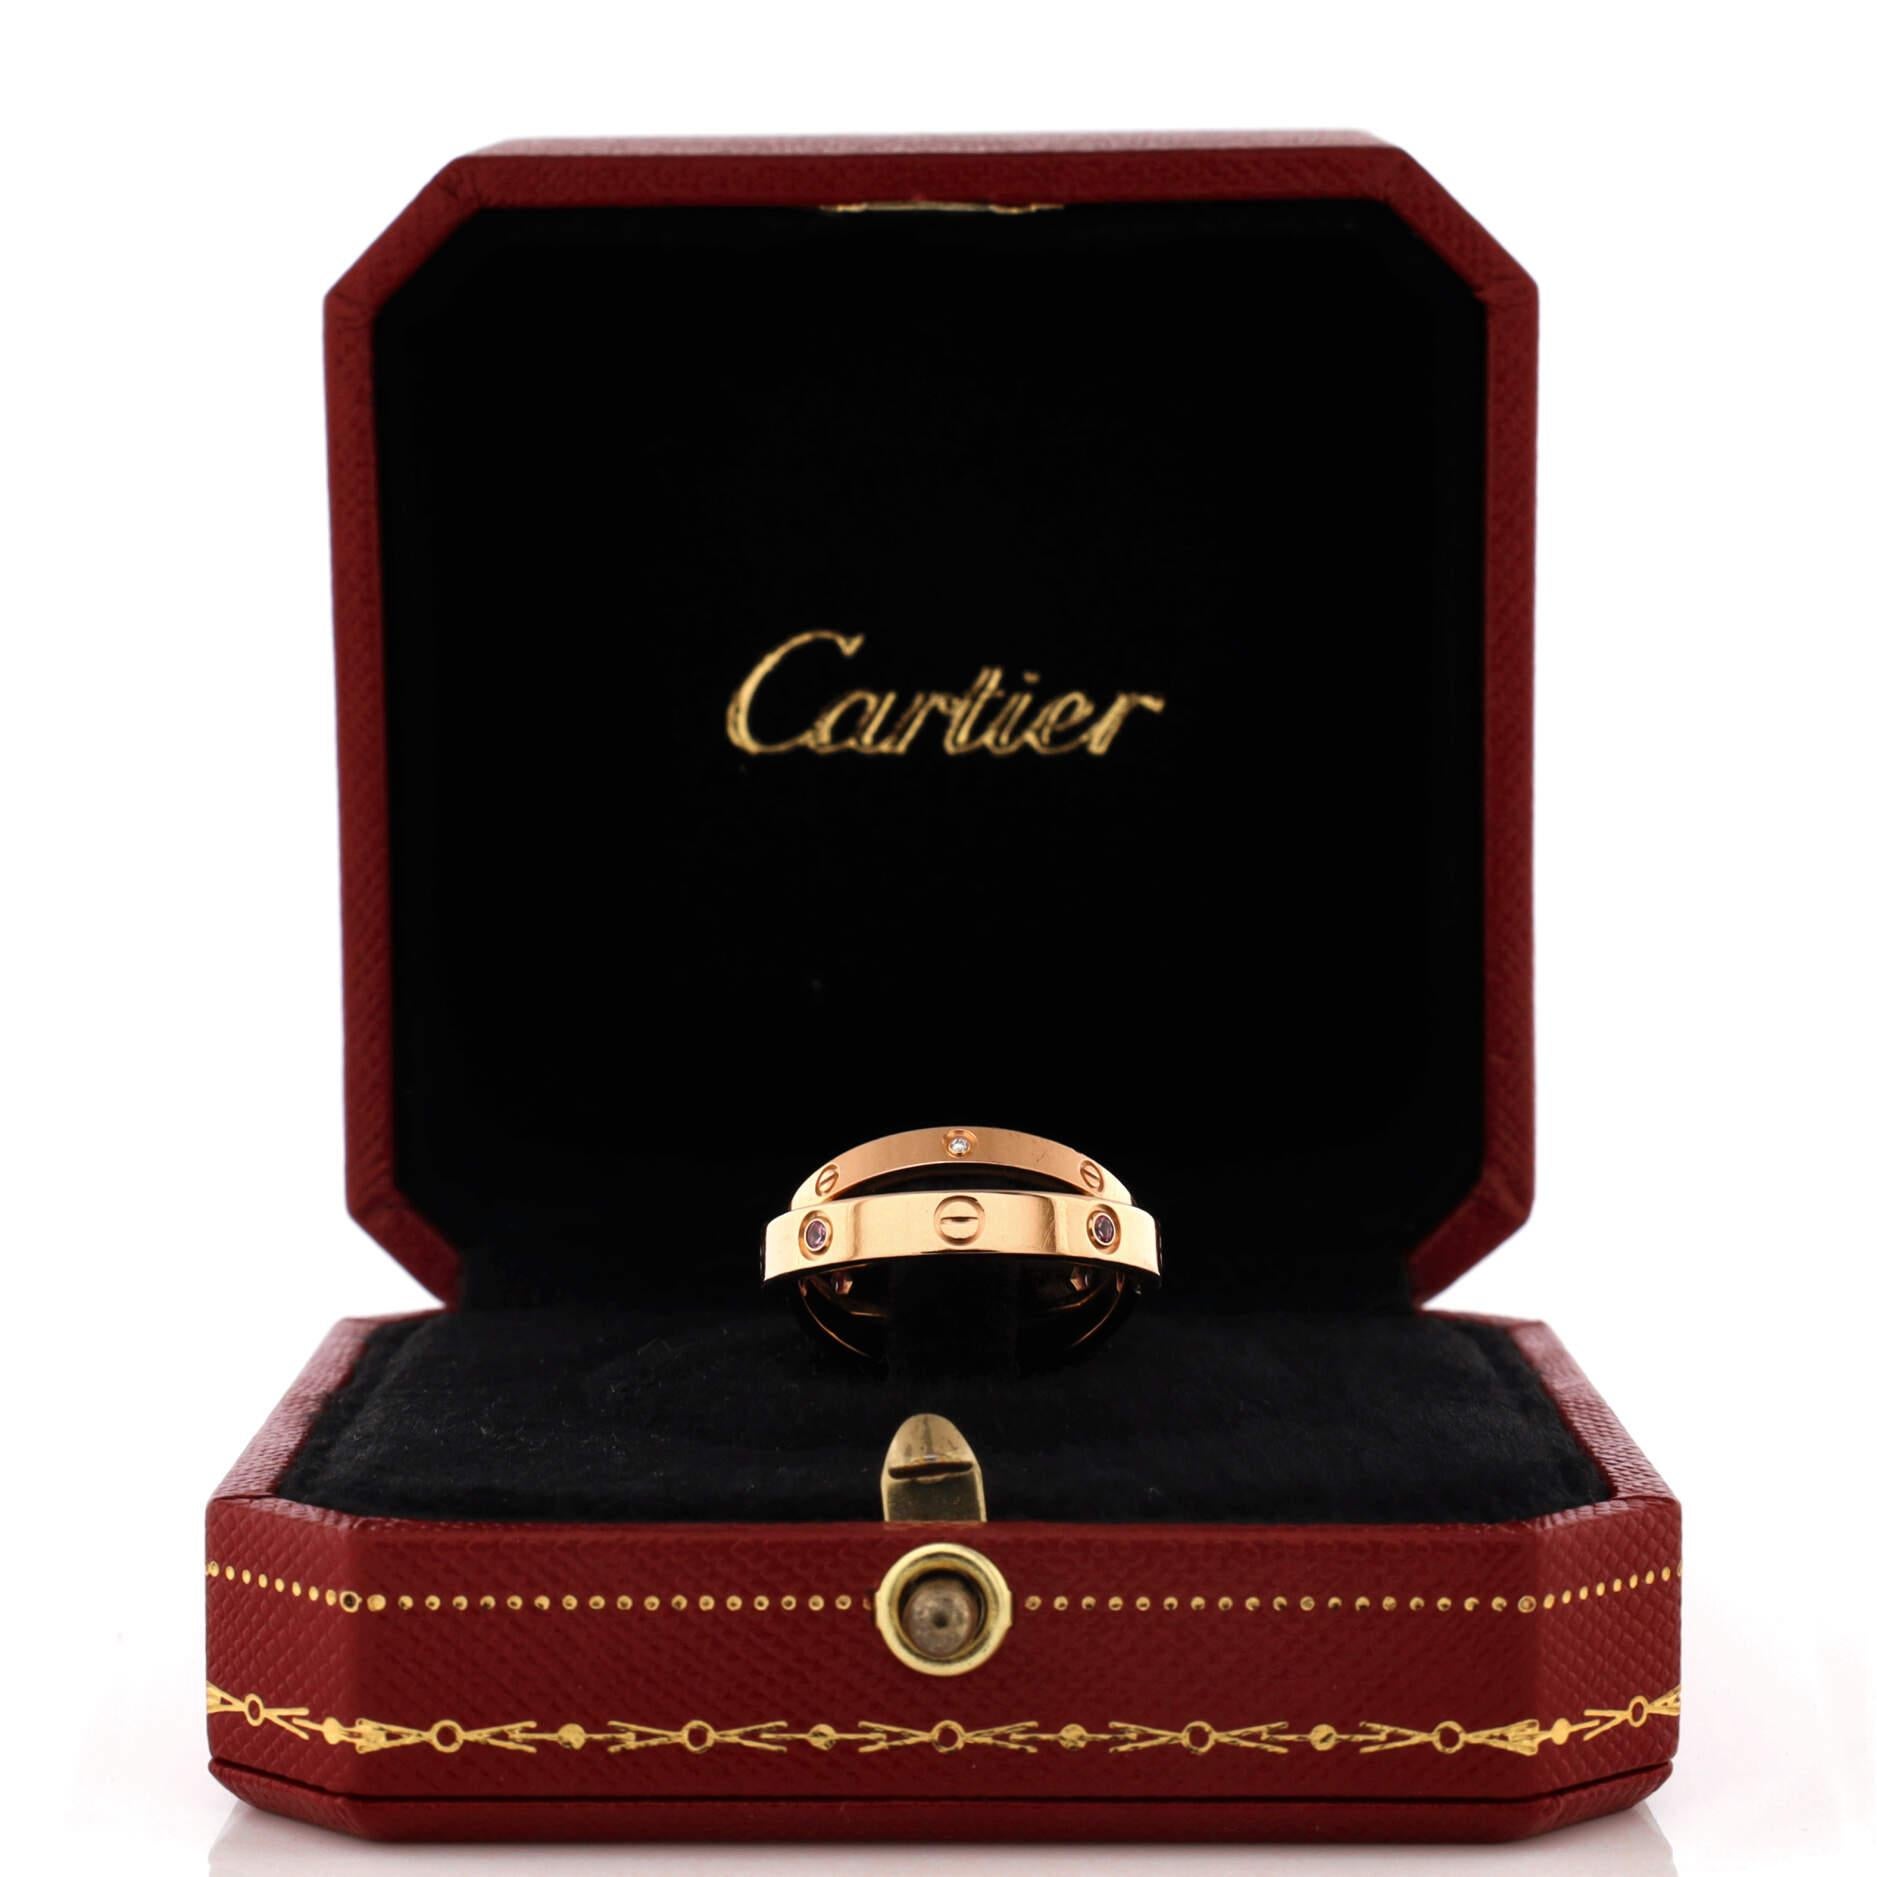 Condition: Very good. Moderate wear throughout.
Accessories: No Accessories
Measurements: Size: 6.75 - 54, Width: 7.60 mm
Designer: Cartier
Model: Love Double Ring 18K Rose Gold with Pink Sapphires and Diamonds
Exterior Color: Rose Gold
Item Number: